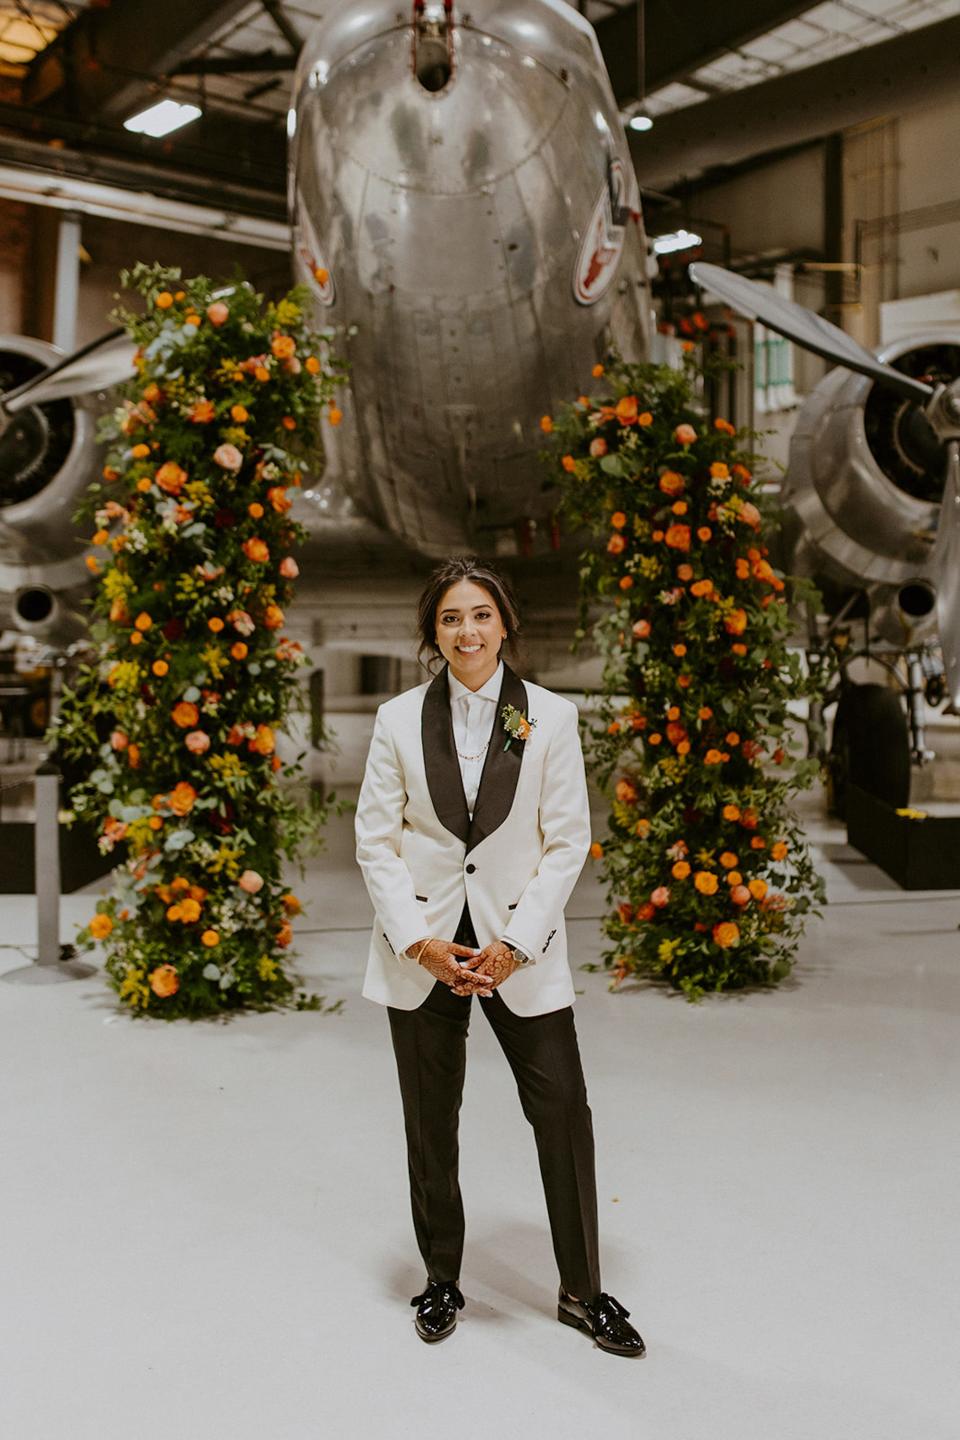 A woman stands in a suit in front of a floral archway and plane.